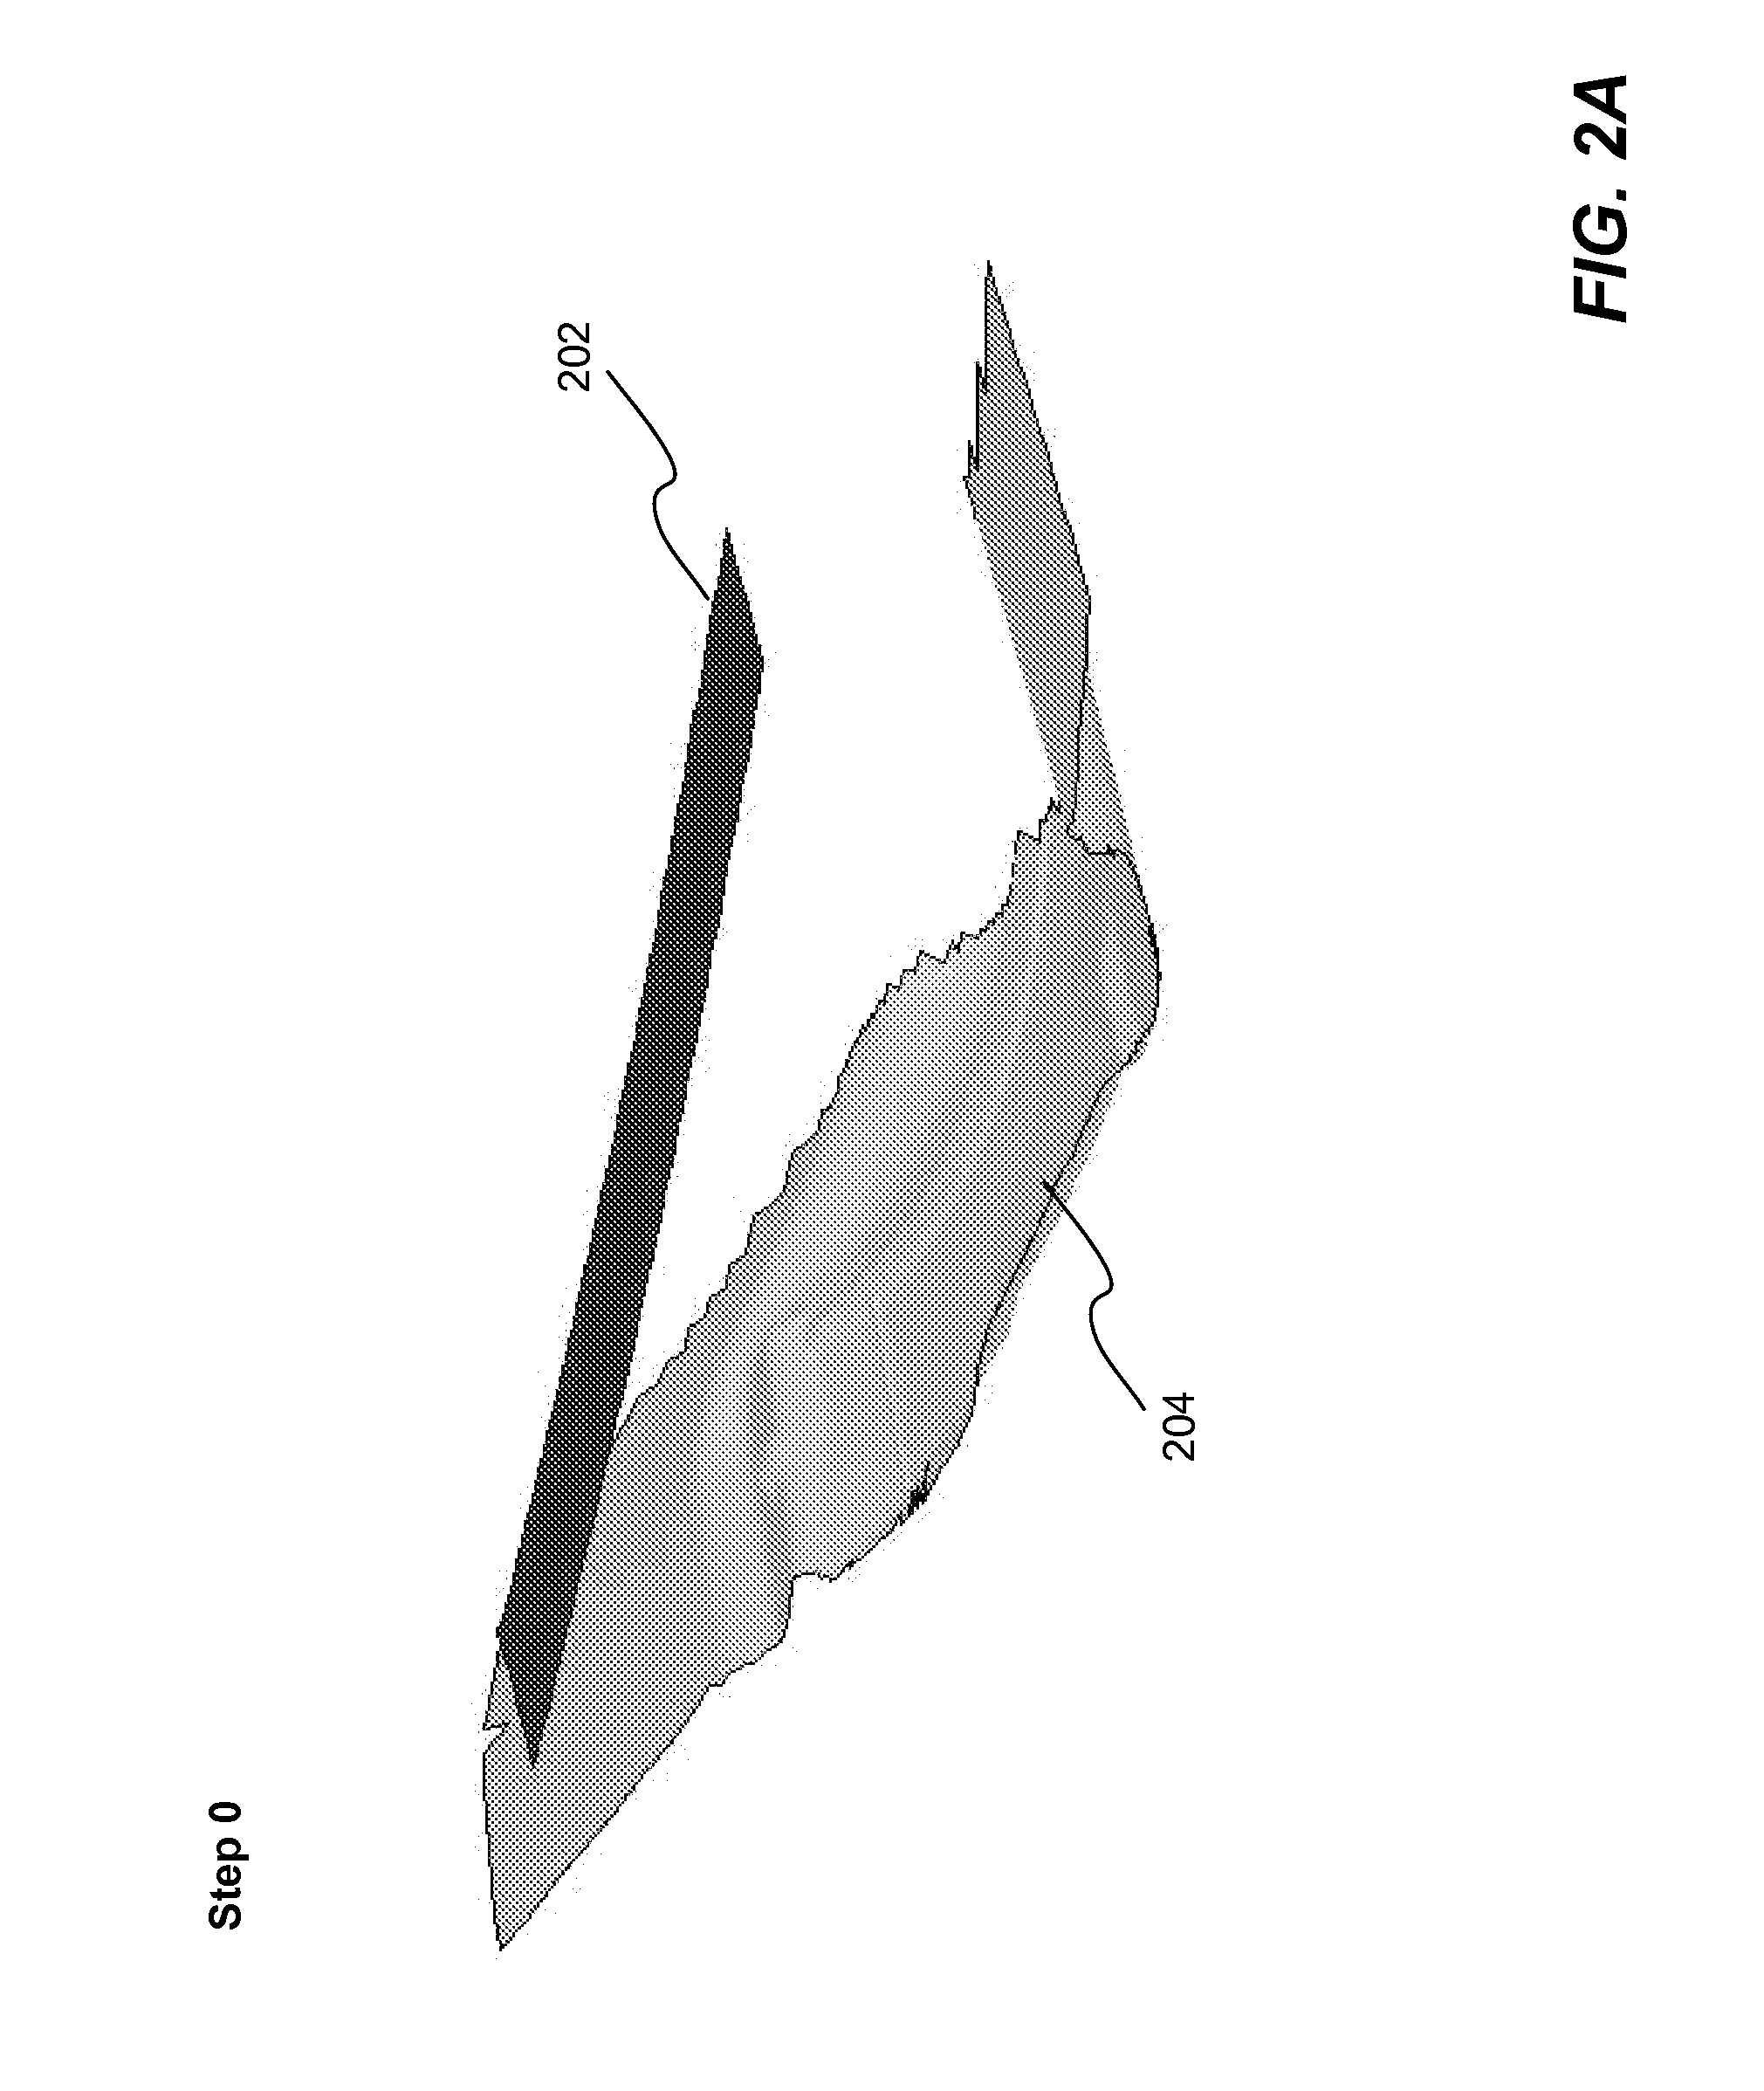 Systems and Methods of Limiting Contact Penetration in Numerical Simulation of Non-linear Structure Response